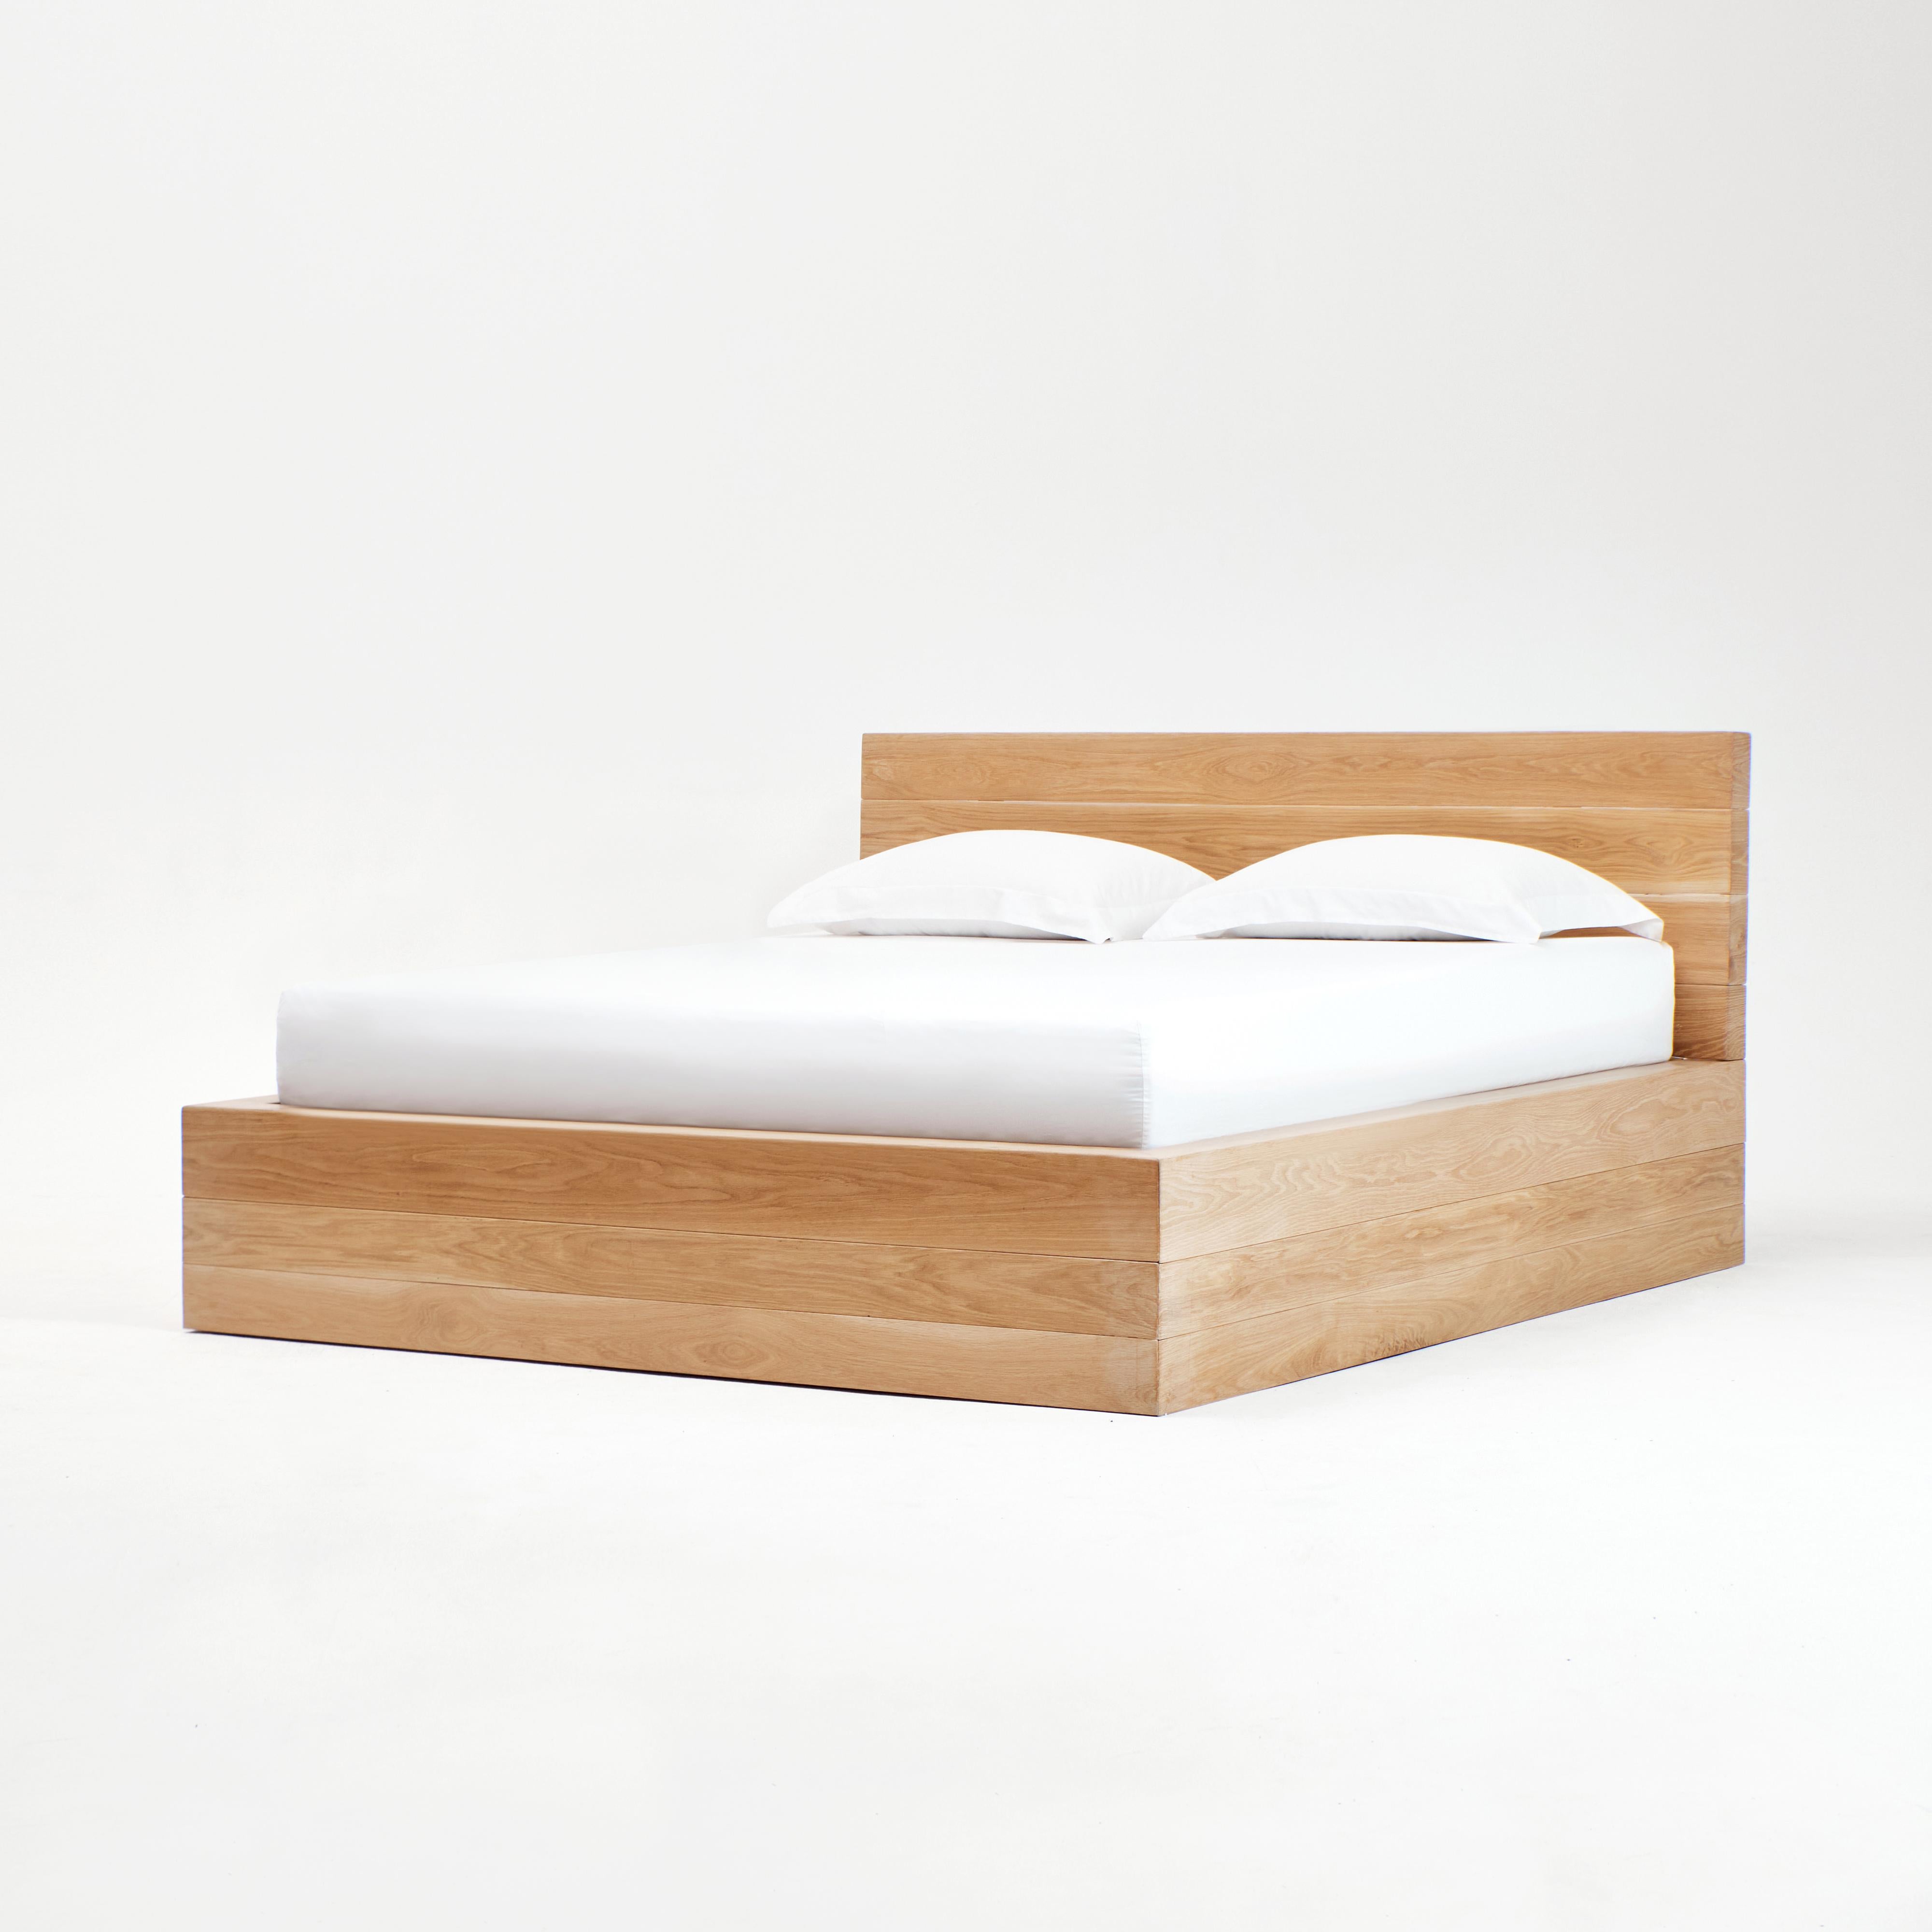 Roque Bed Frame
Designed by Project 213A in 2023

Bed and headboard are made from individual sized solid oak elements.
Mattress not included.
Headboard height - 101 cm

Picture shows Roque Bed with a king size US mattress: 193 x 203 cm / 76″ x